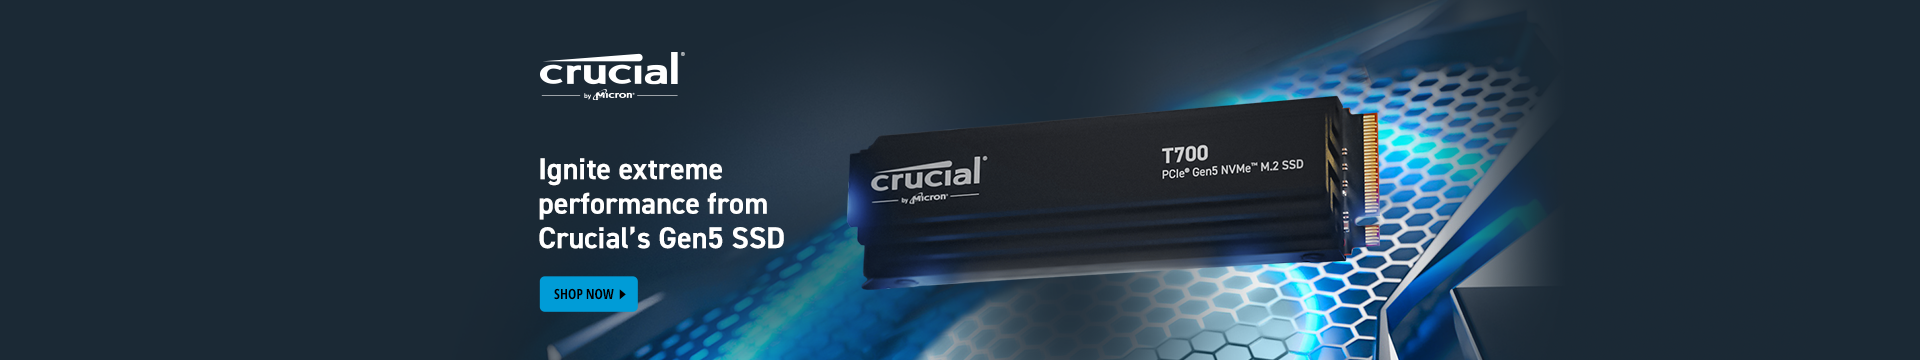 Ignite extreme performance from Crucial’s Gen5 SSD